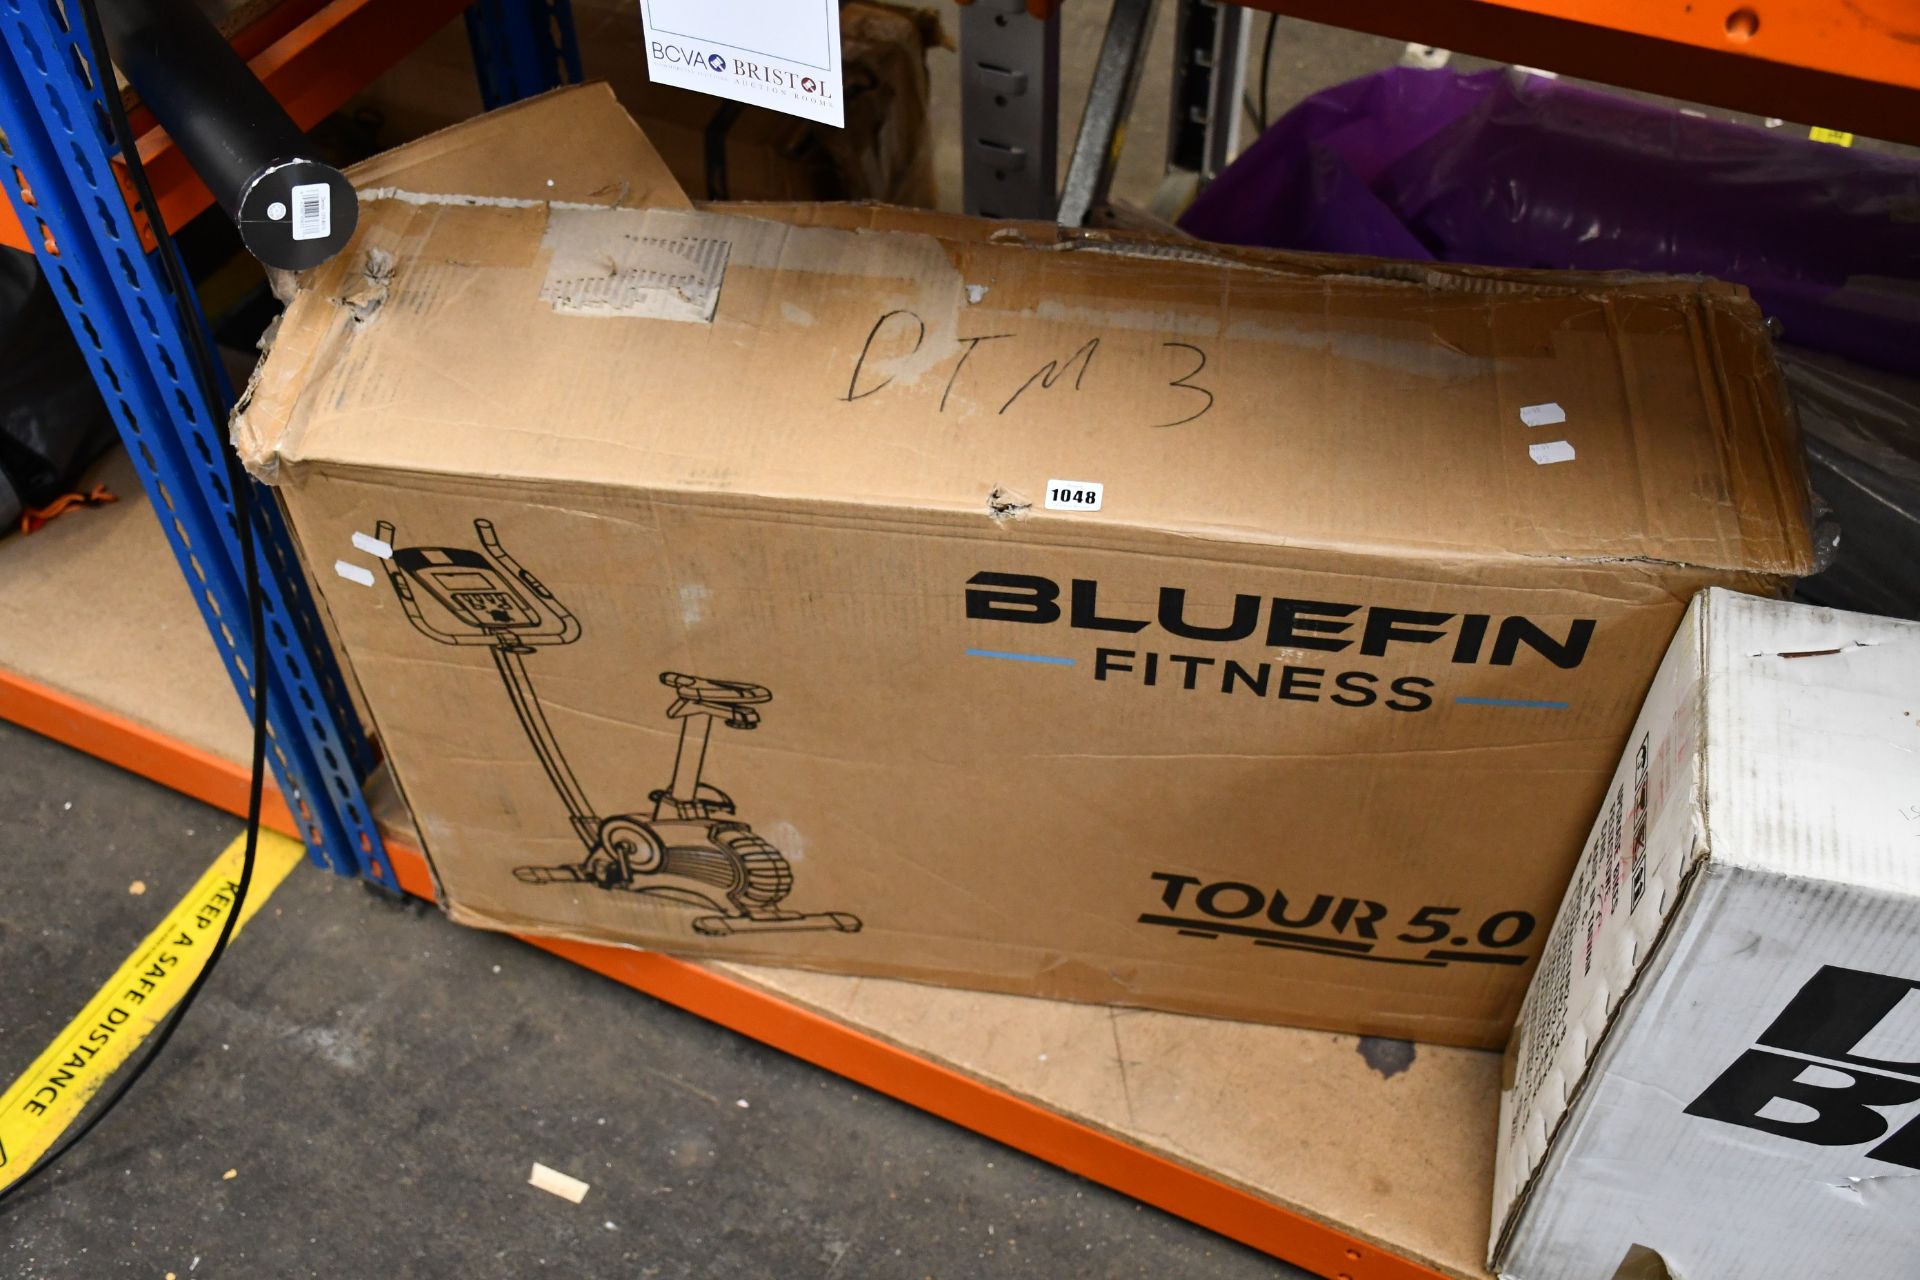 One boxed Bluefin Fitness Tour 5.0 exercise bike.